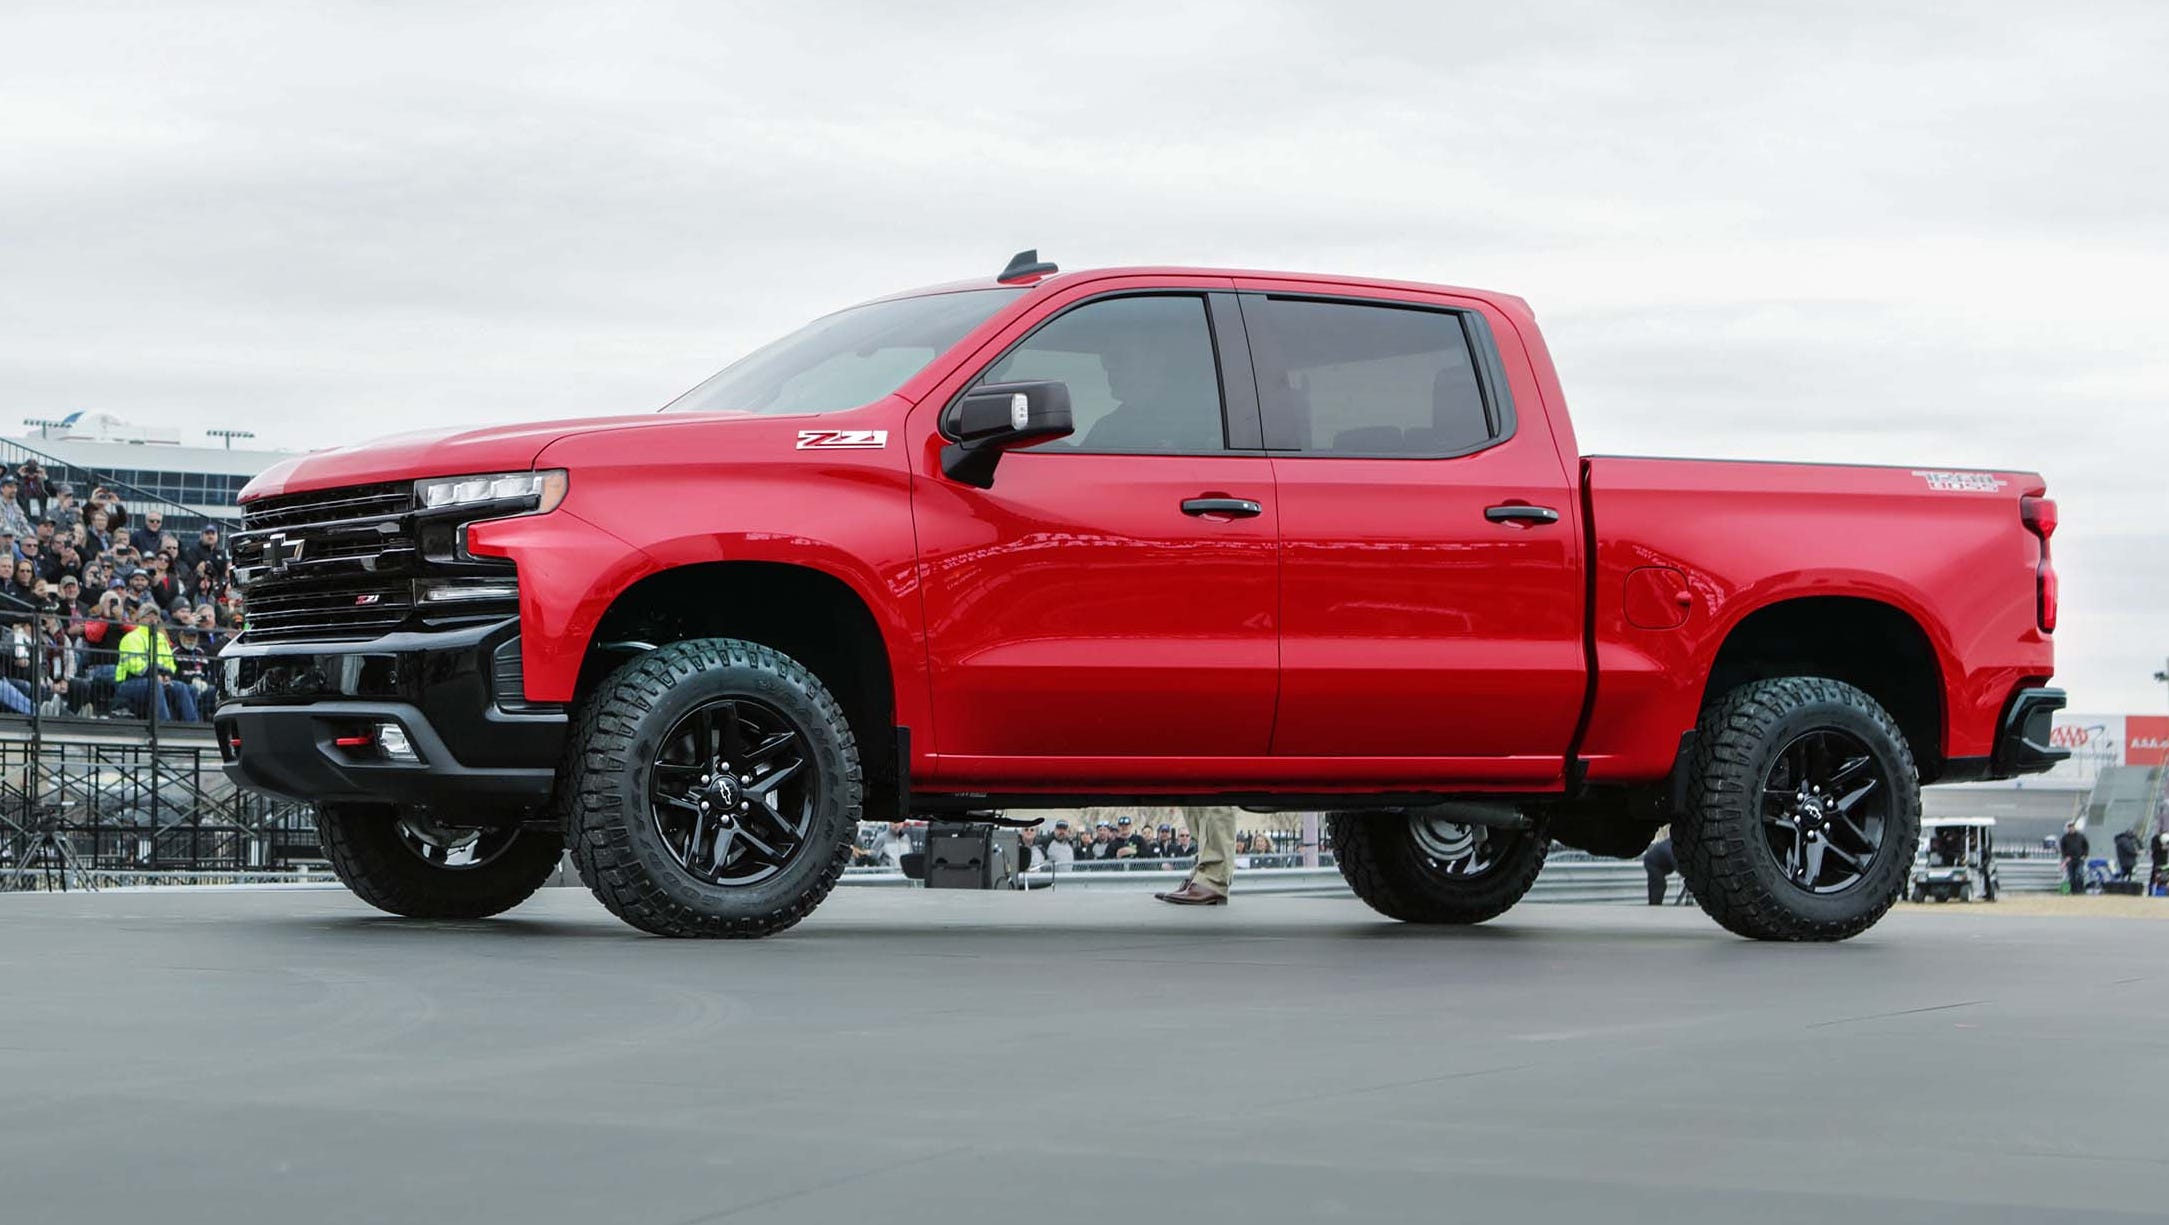 After being lowered into Texas Motor Speedway by chopper, the 2019 Chevy Silverado pickup was paraded before some 1000 Chevy customers who were celebrating 100 years of Chevy trucks.